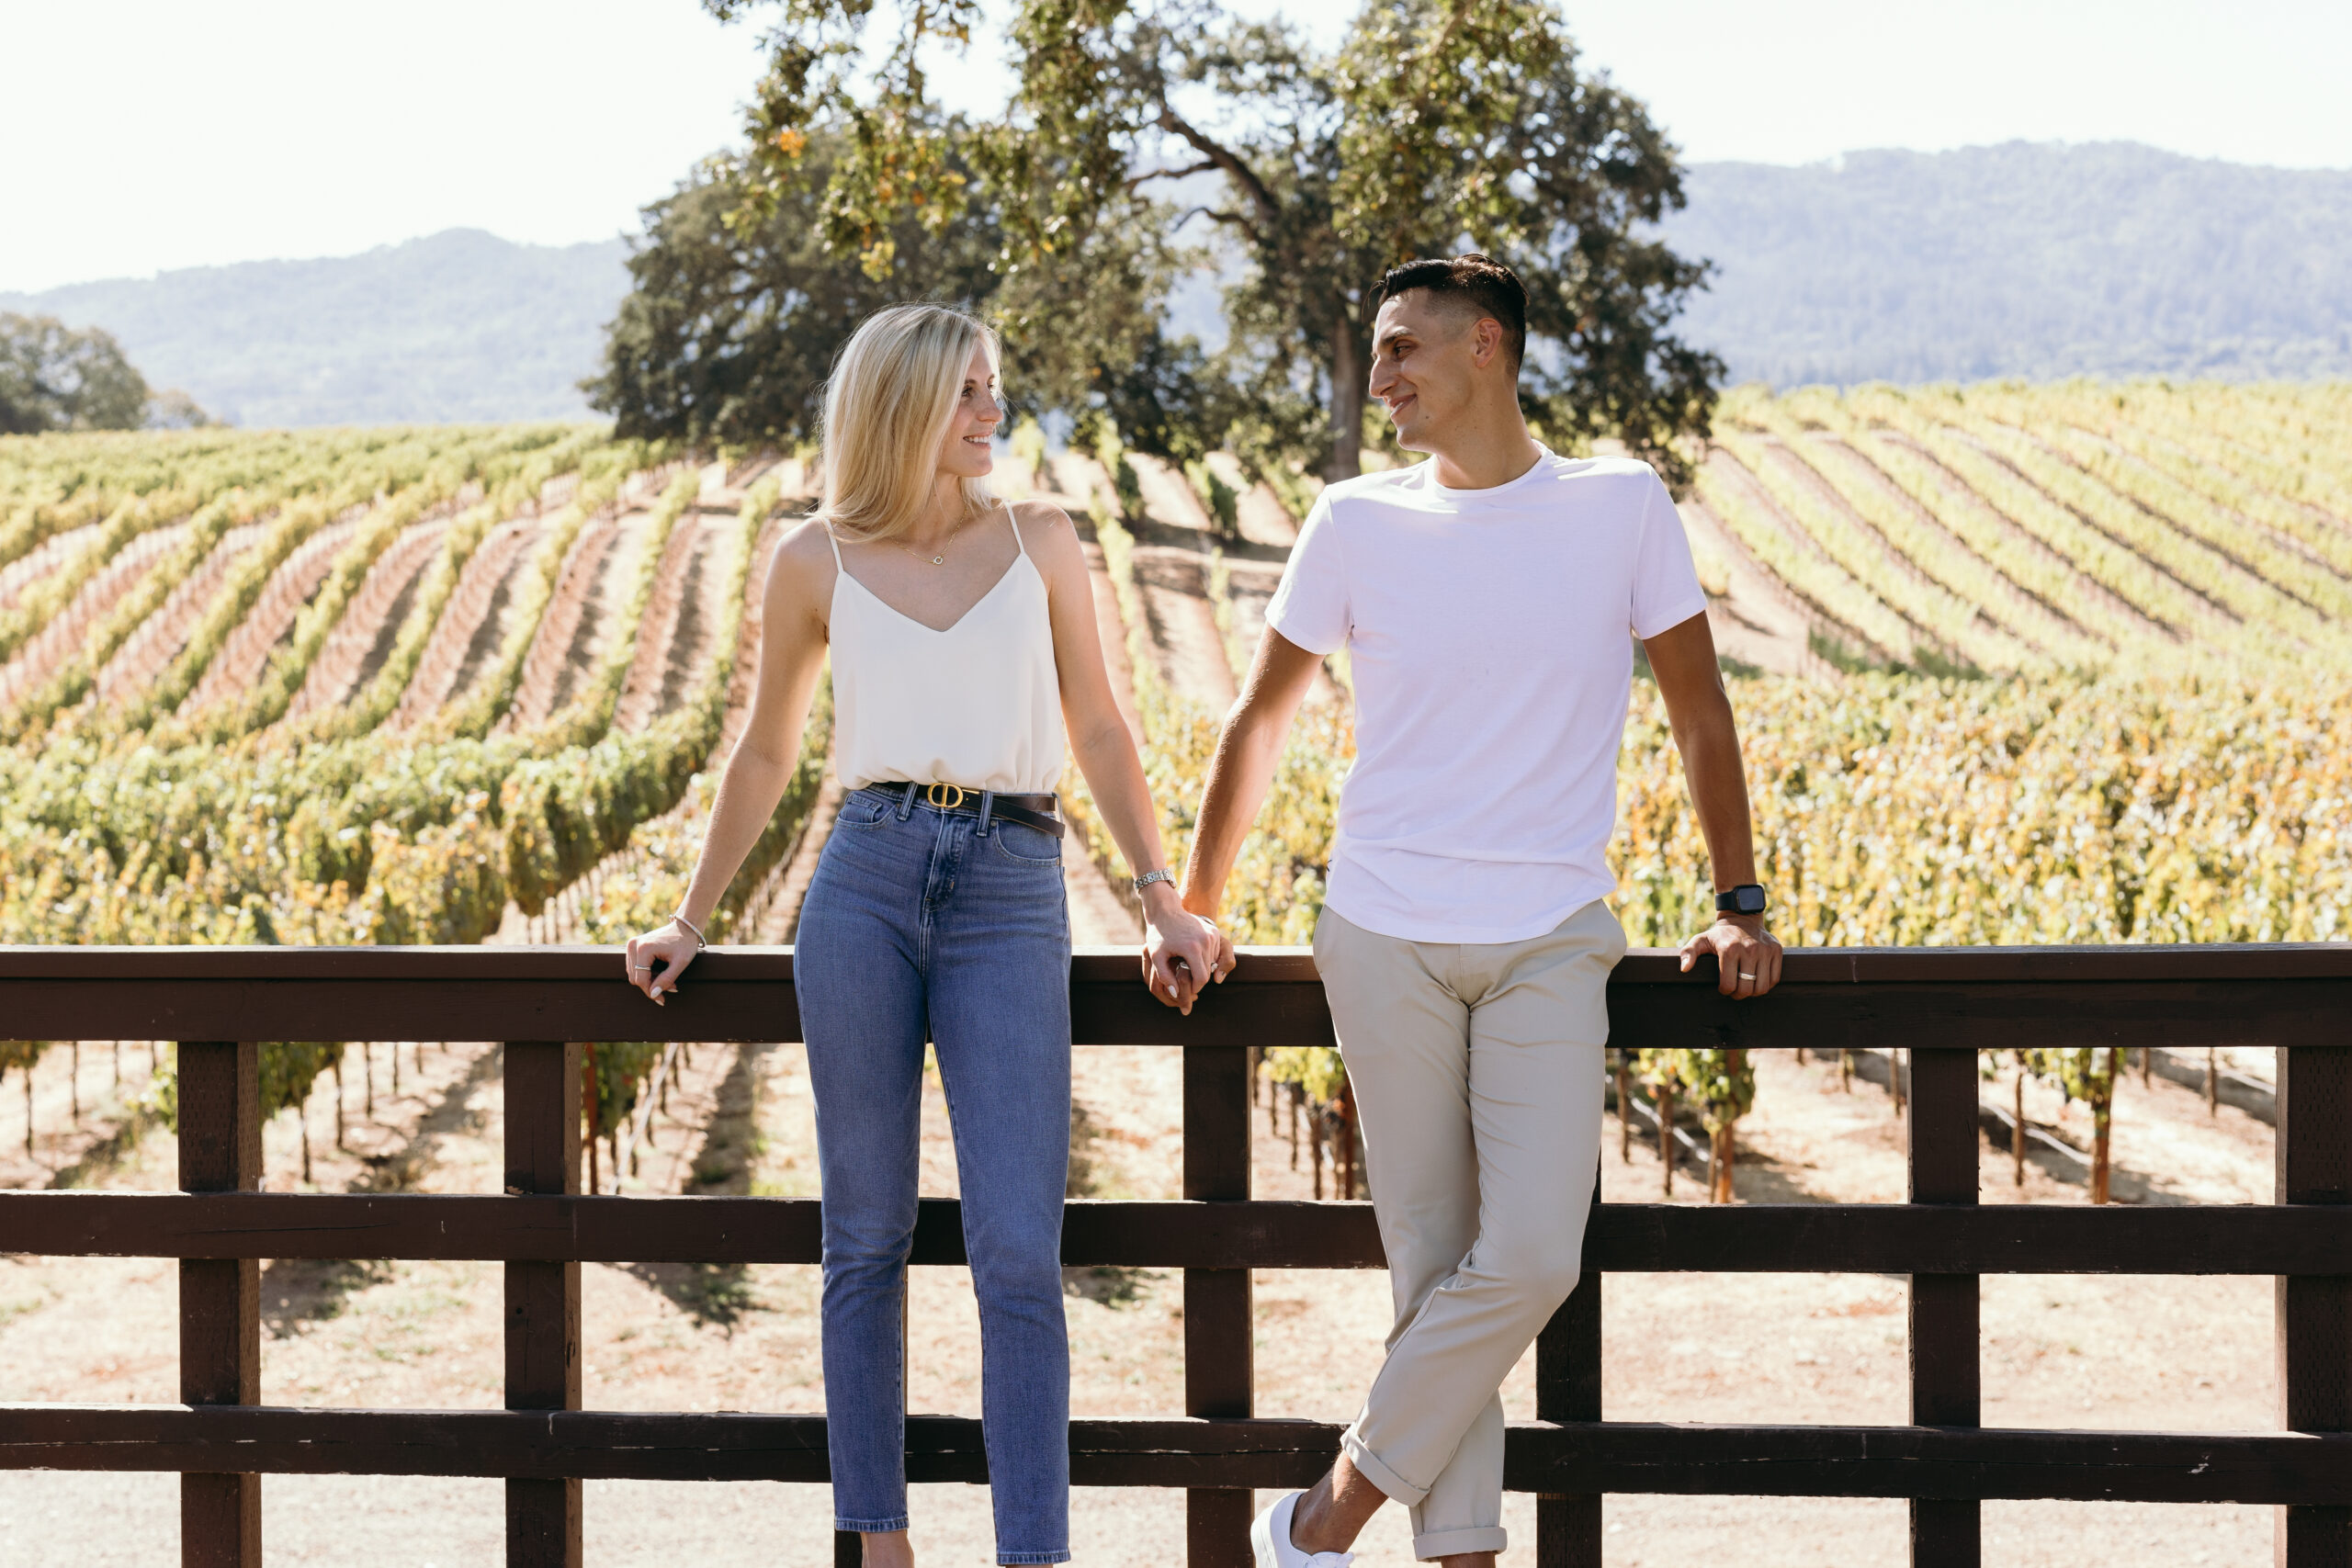 Wine tasting at B.R Cohn is the perfect backdrop for an Engagement photoshoot